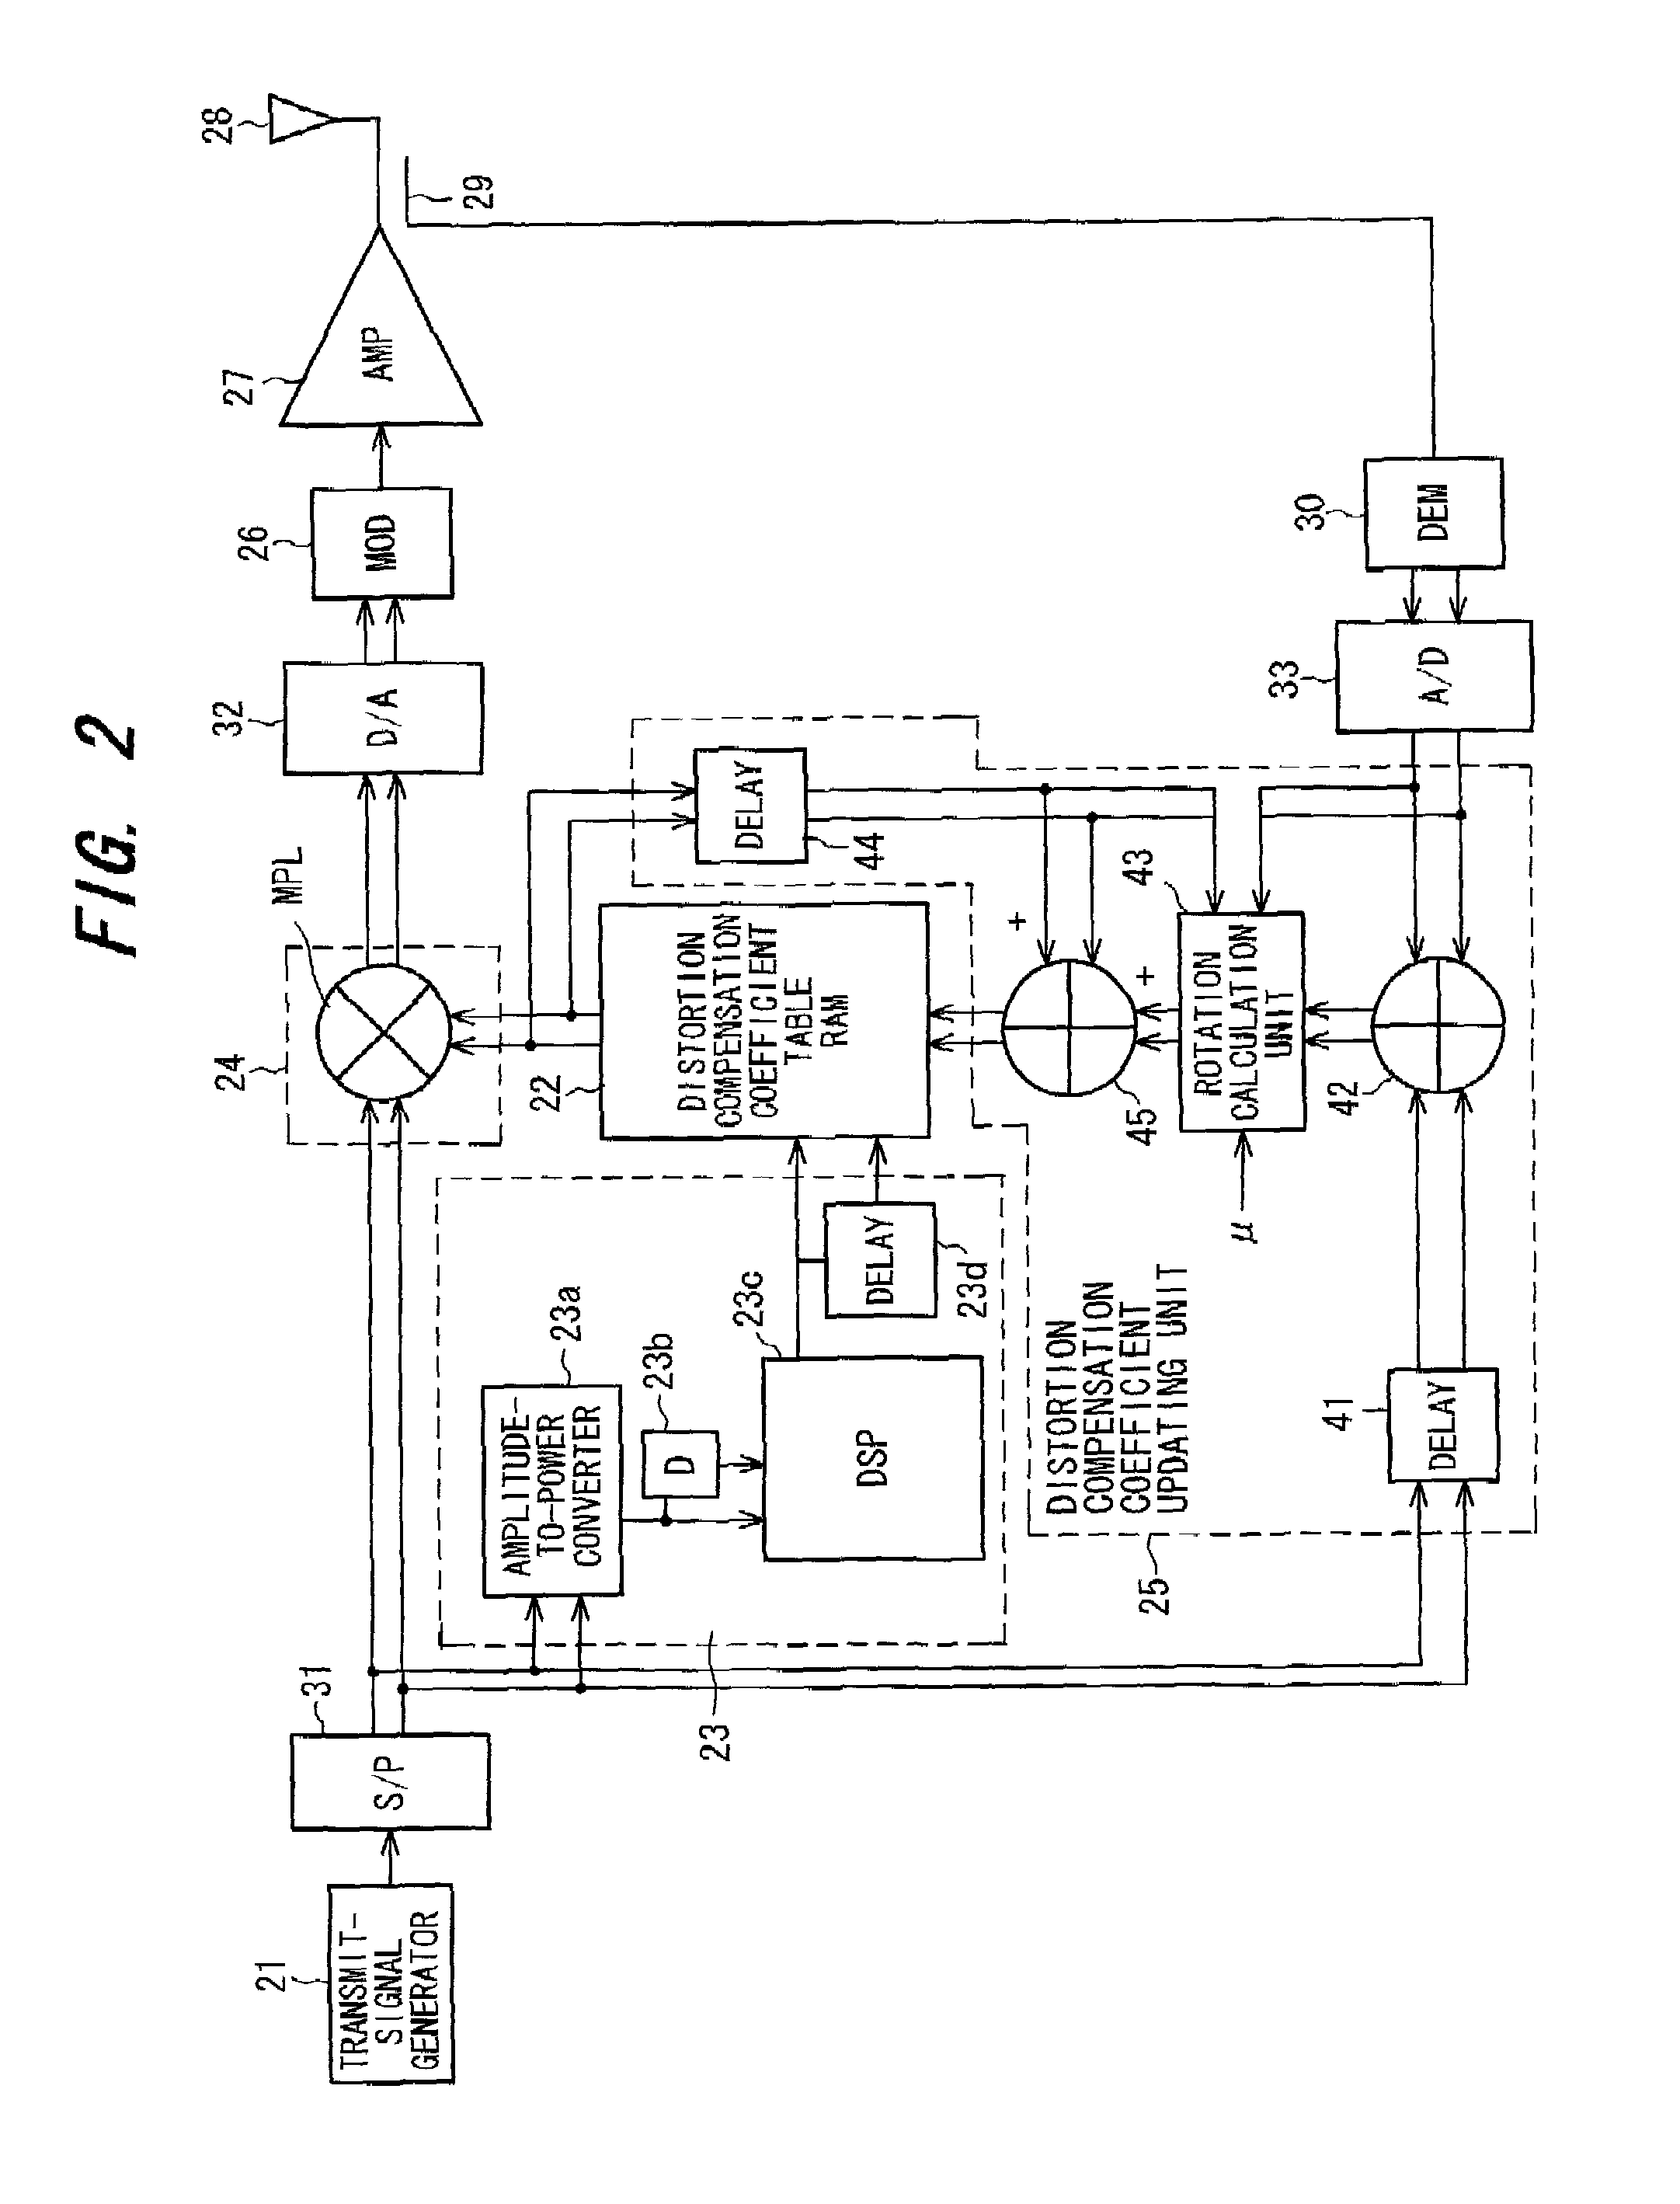 Method and apparatus for compensating for distortion in radio apparatus